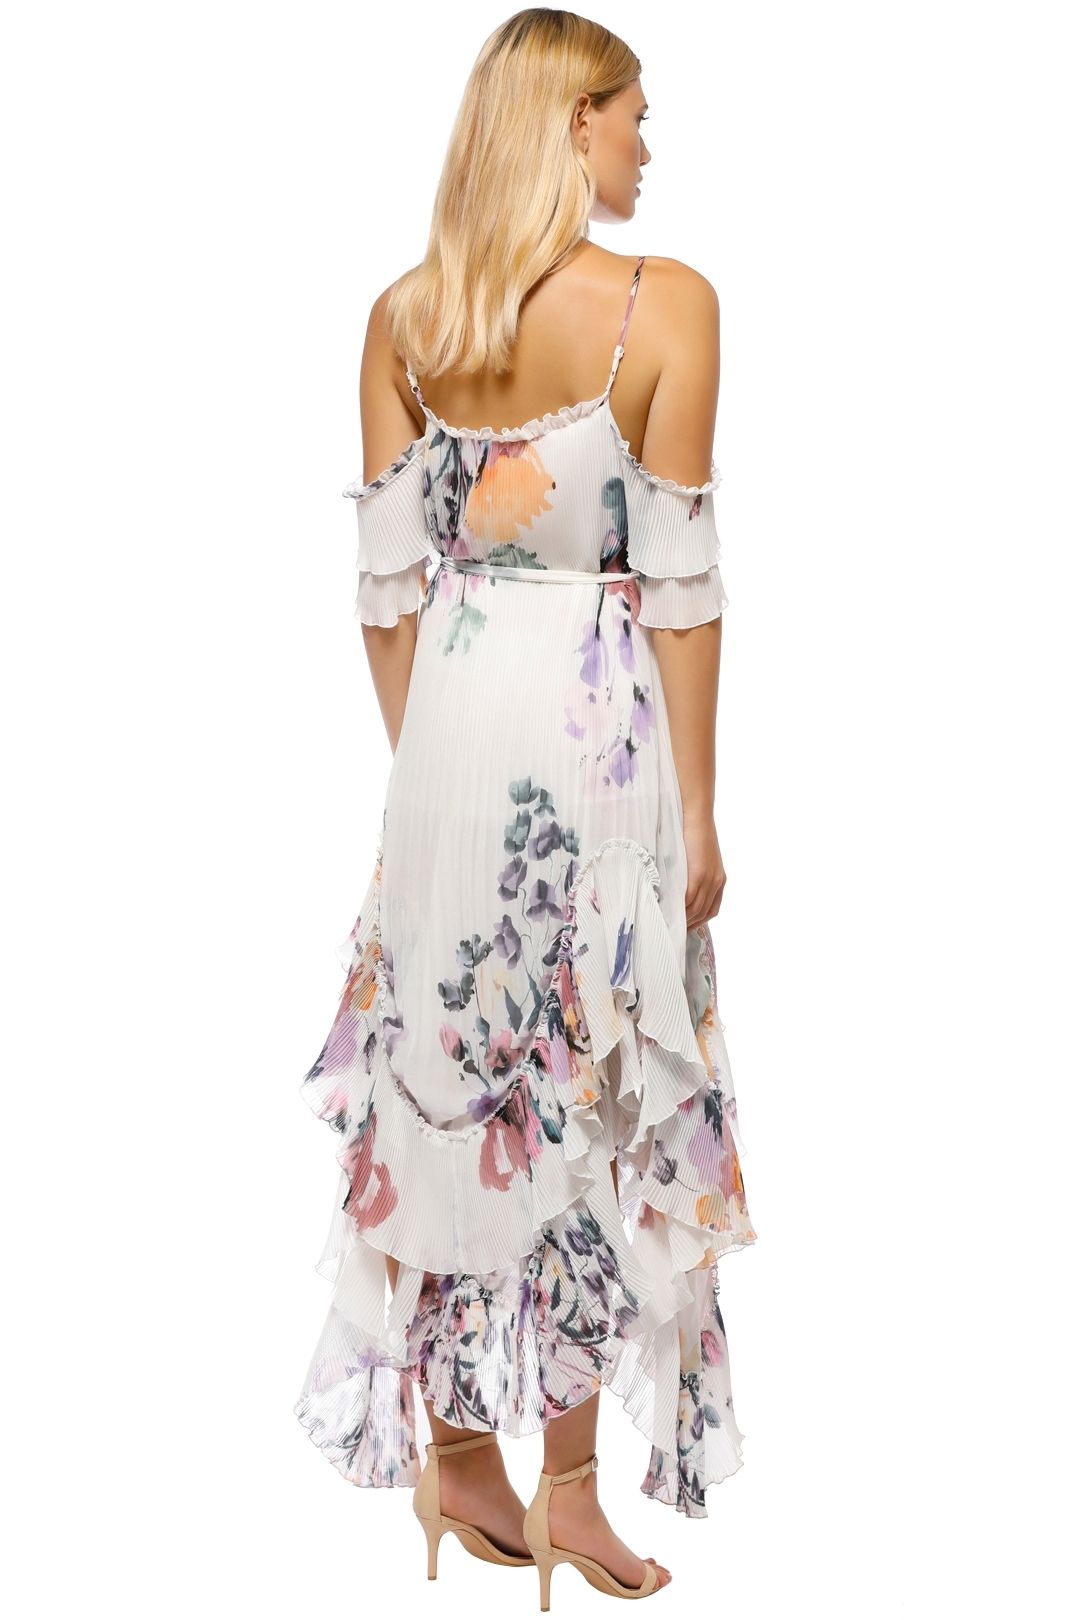 We Are Kindred - Catarina Pleat Maxi Dress - White Floral - Back